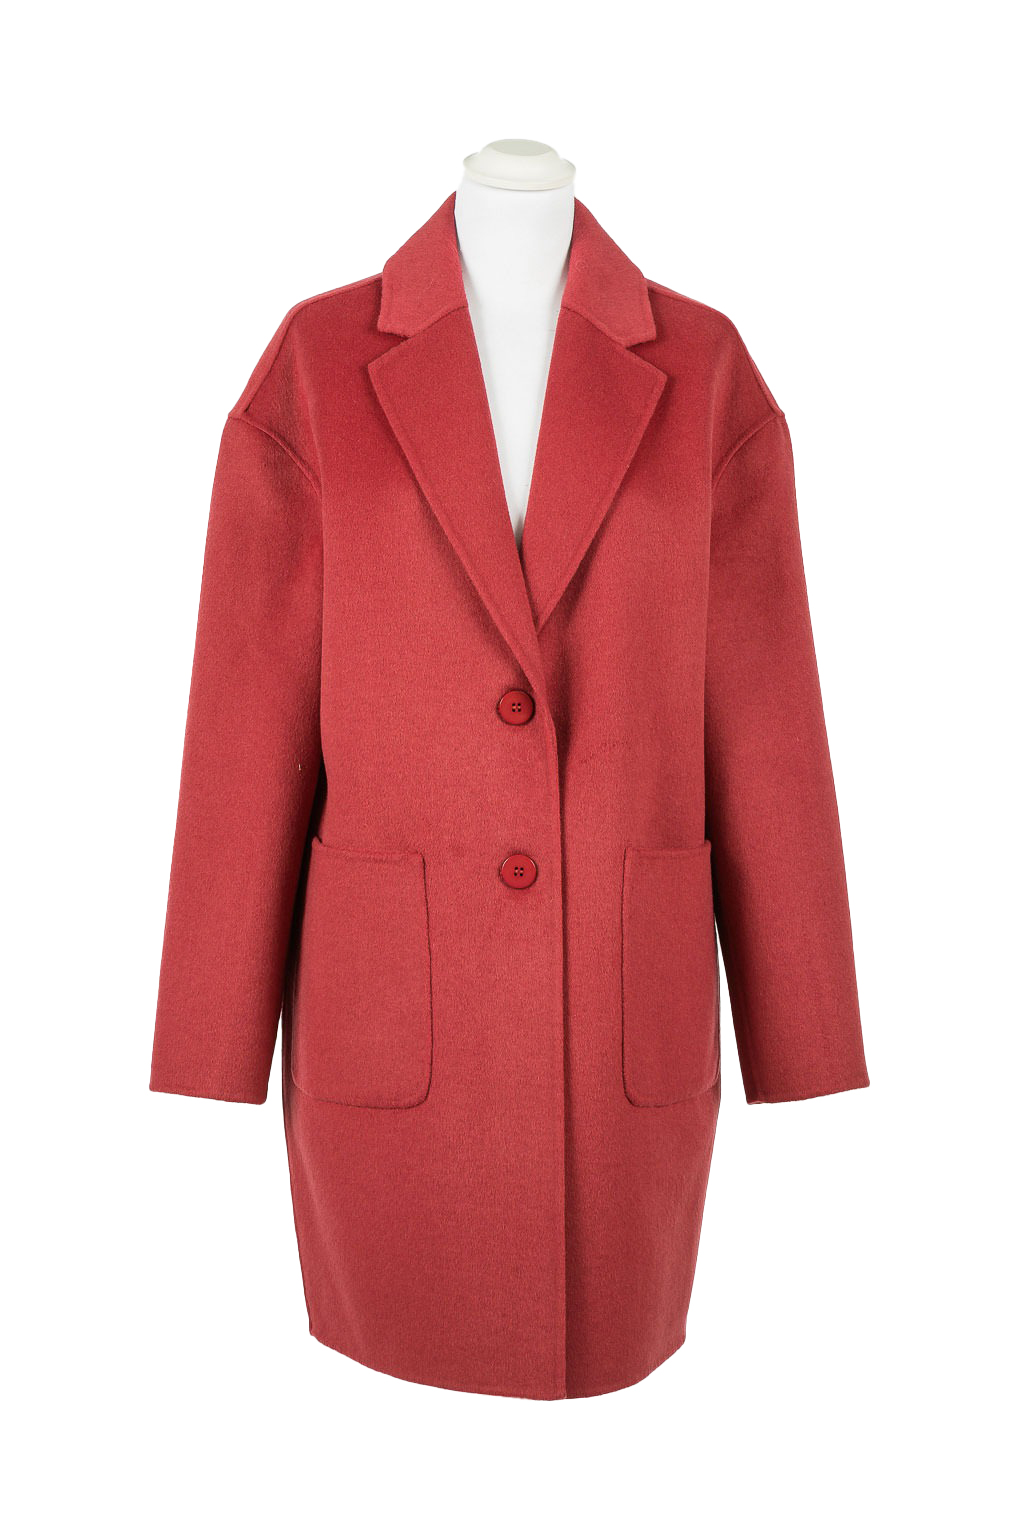 TWINSET Cappotto 232TP2015 Holly Berry (2)